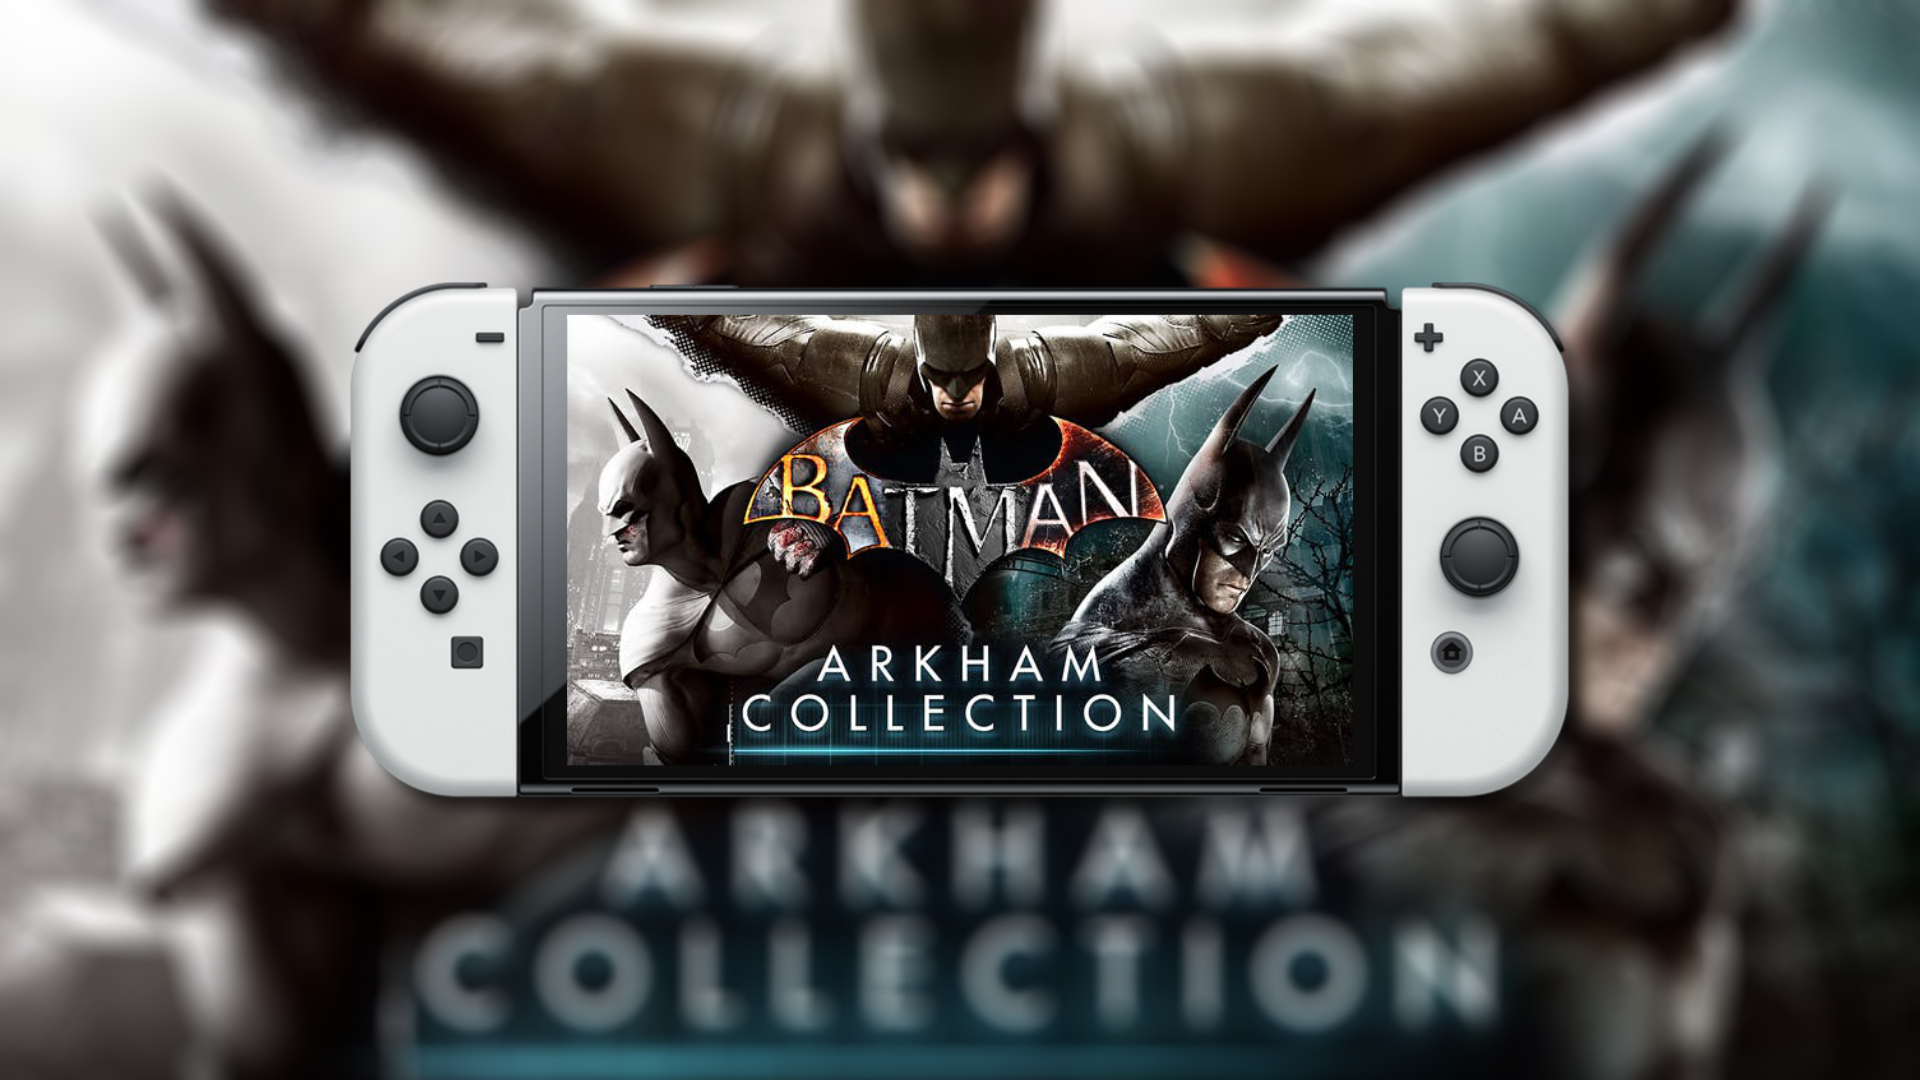 Batman Arkham Collection could be coming to Switch | KitGuru